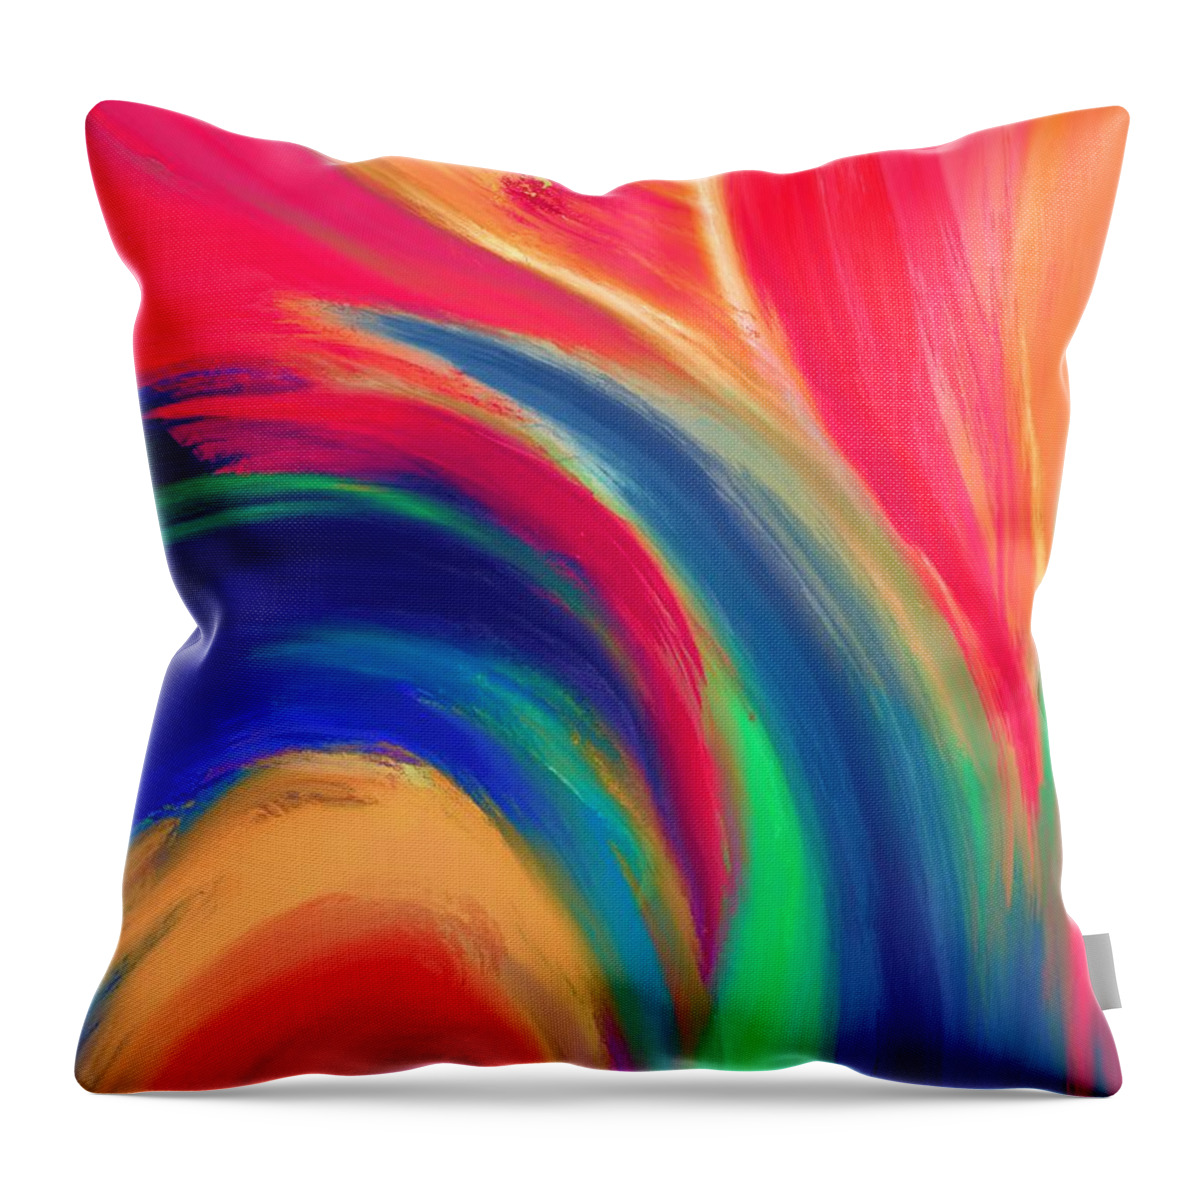 Abstract Throw Pillow featuring the digital art Fiery Fire - Modern Colorful Abstract Digital Art by Sambel Pedes